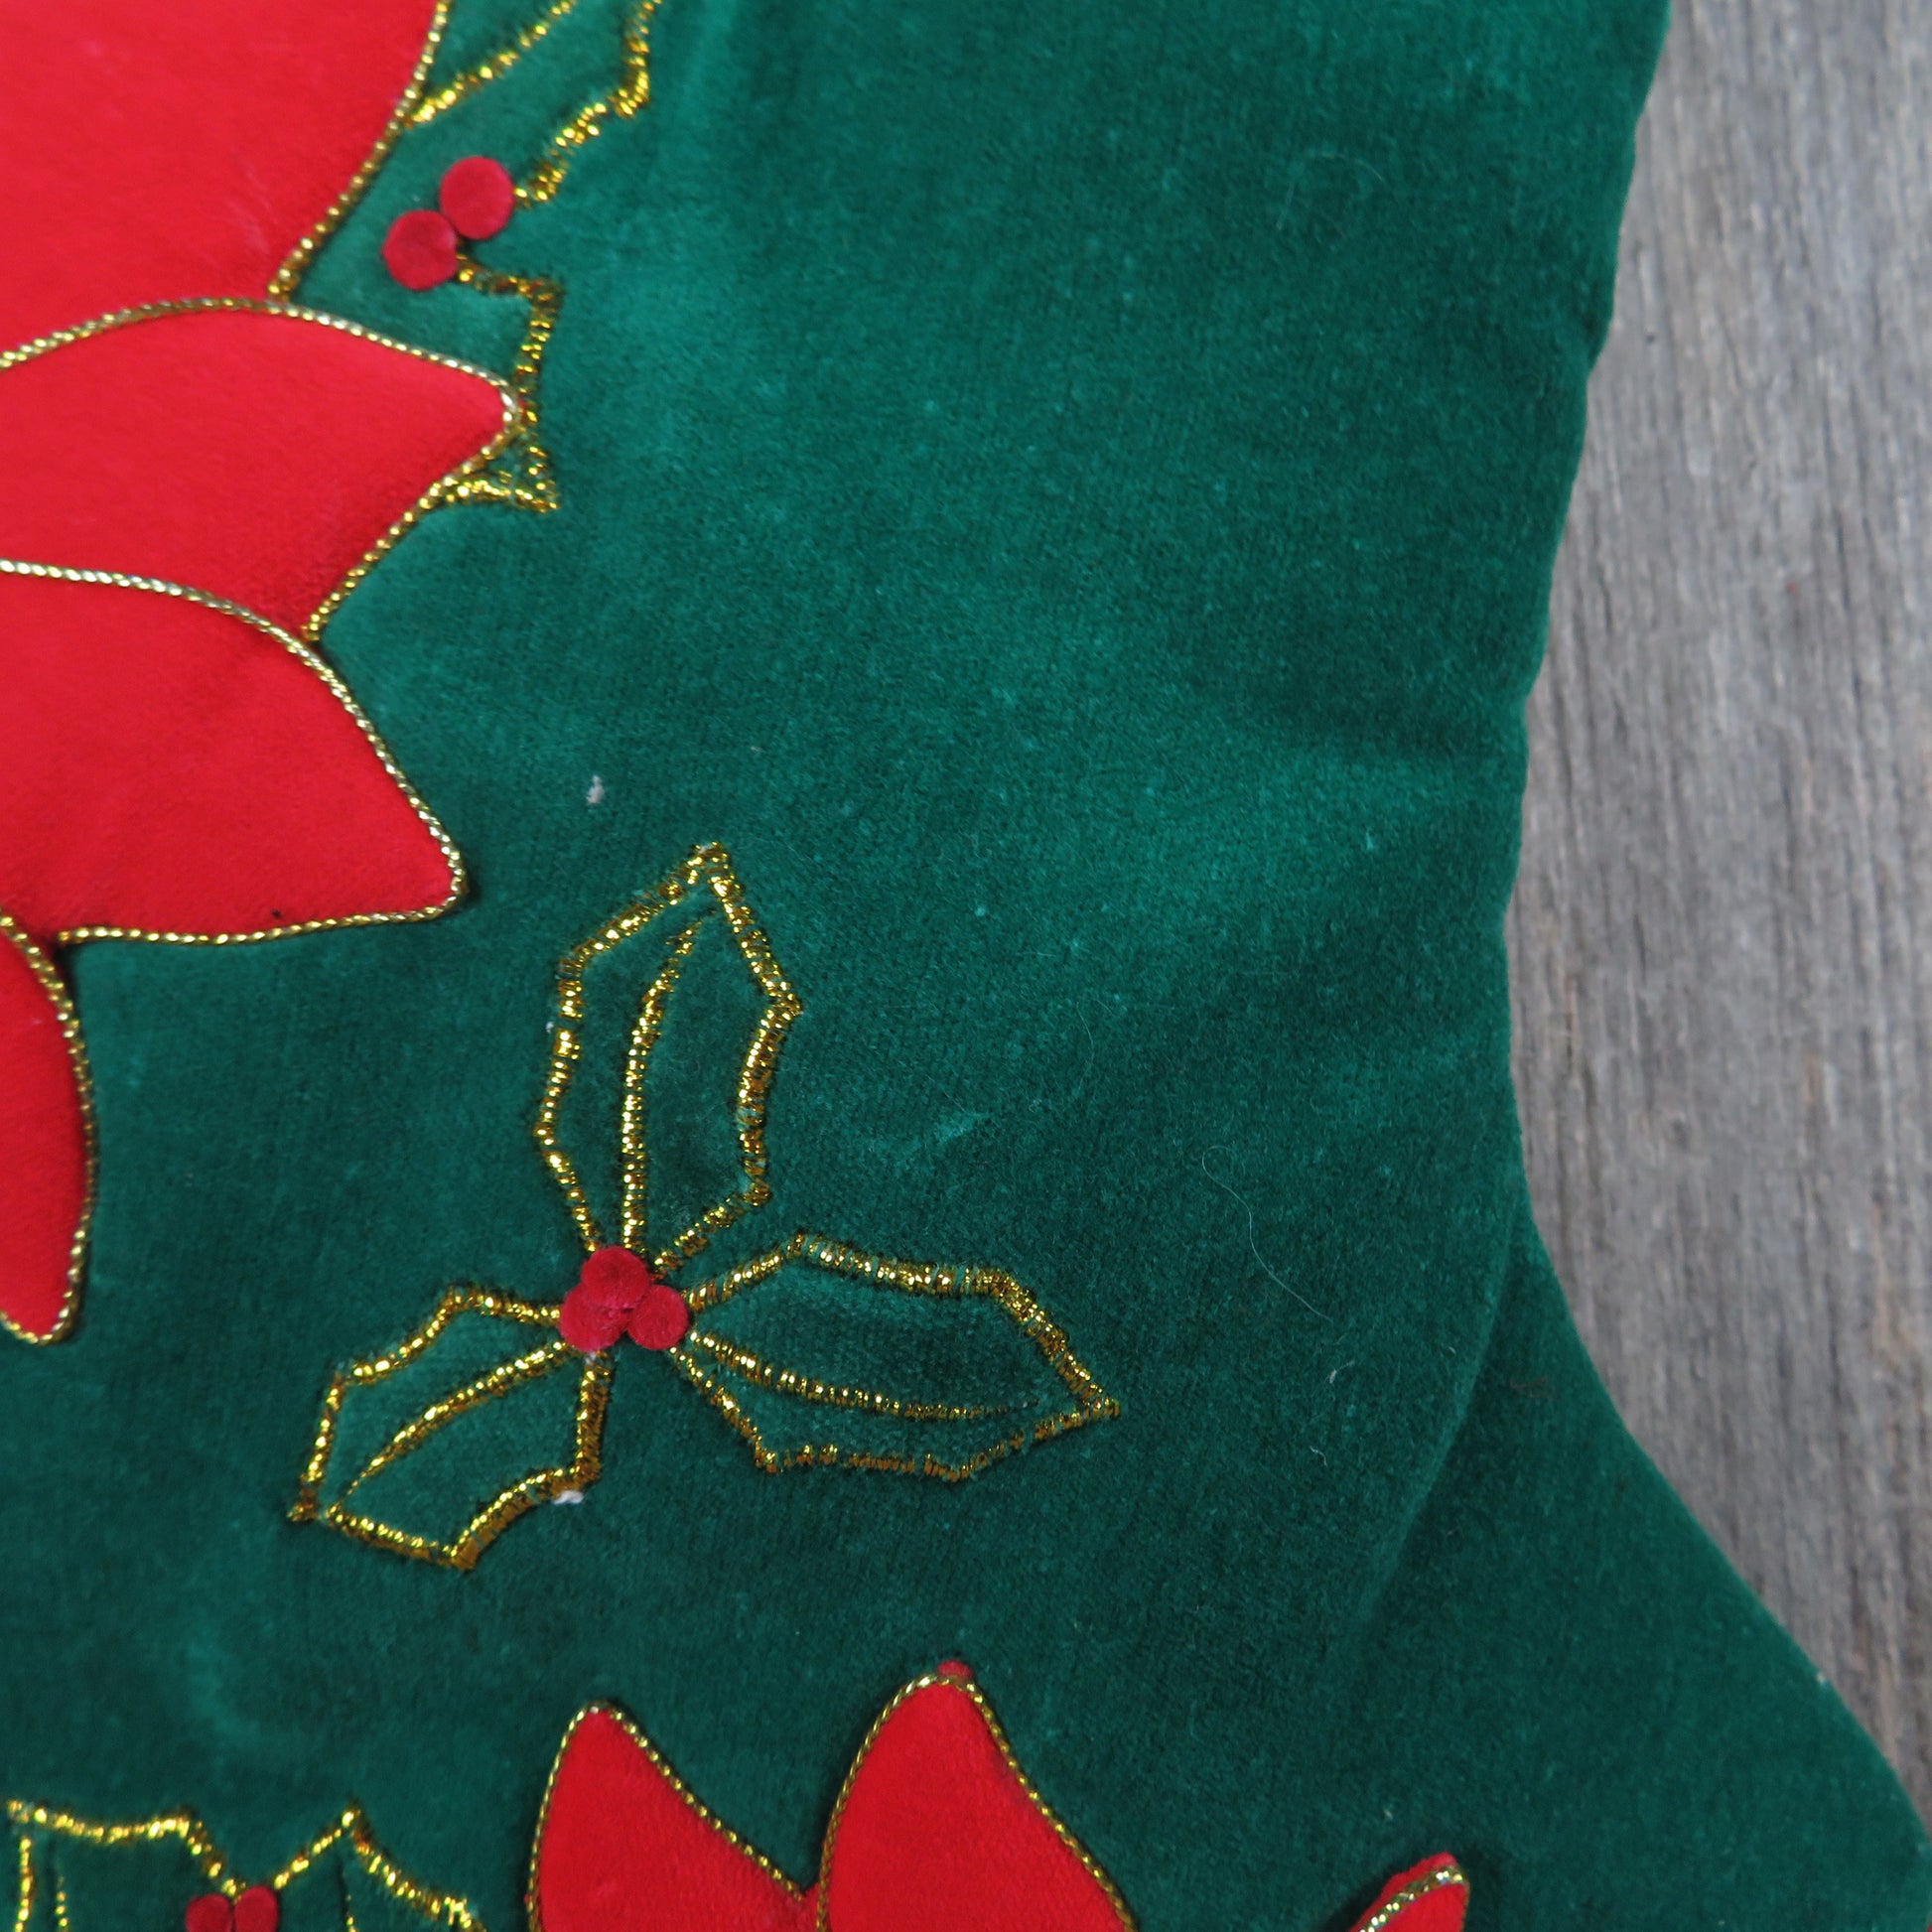 Vintage Poinsettia Christmas Stocking Green Velveteen Gold Cord Applique Flowers Holiday Home Decor - At Grandma's Table